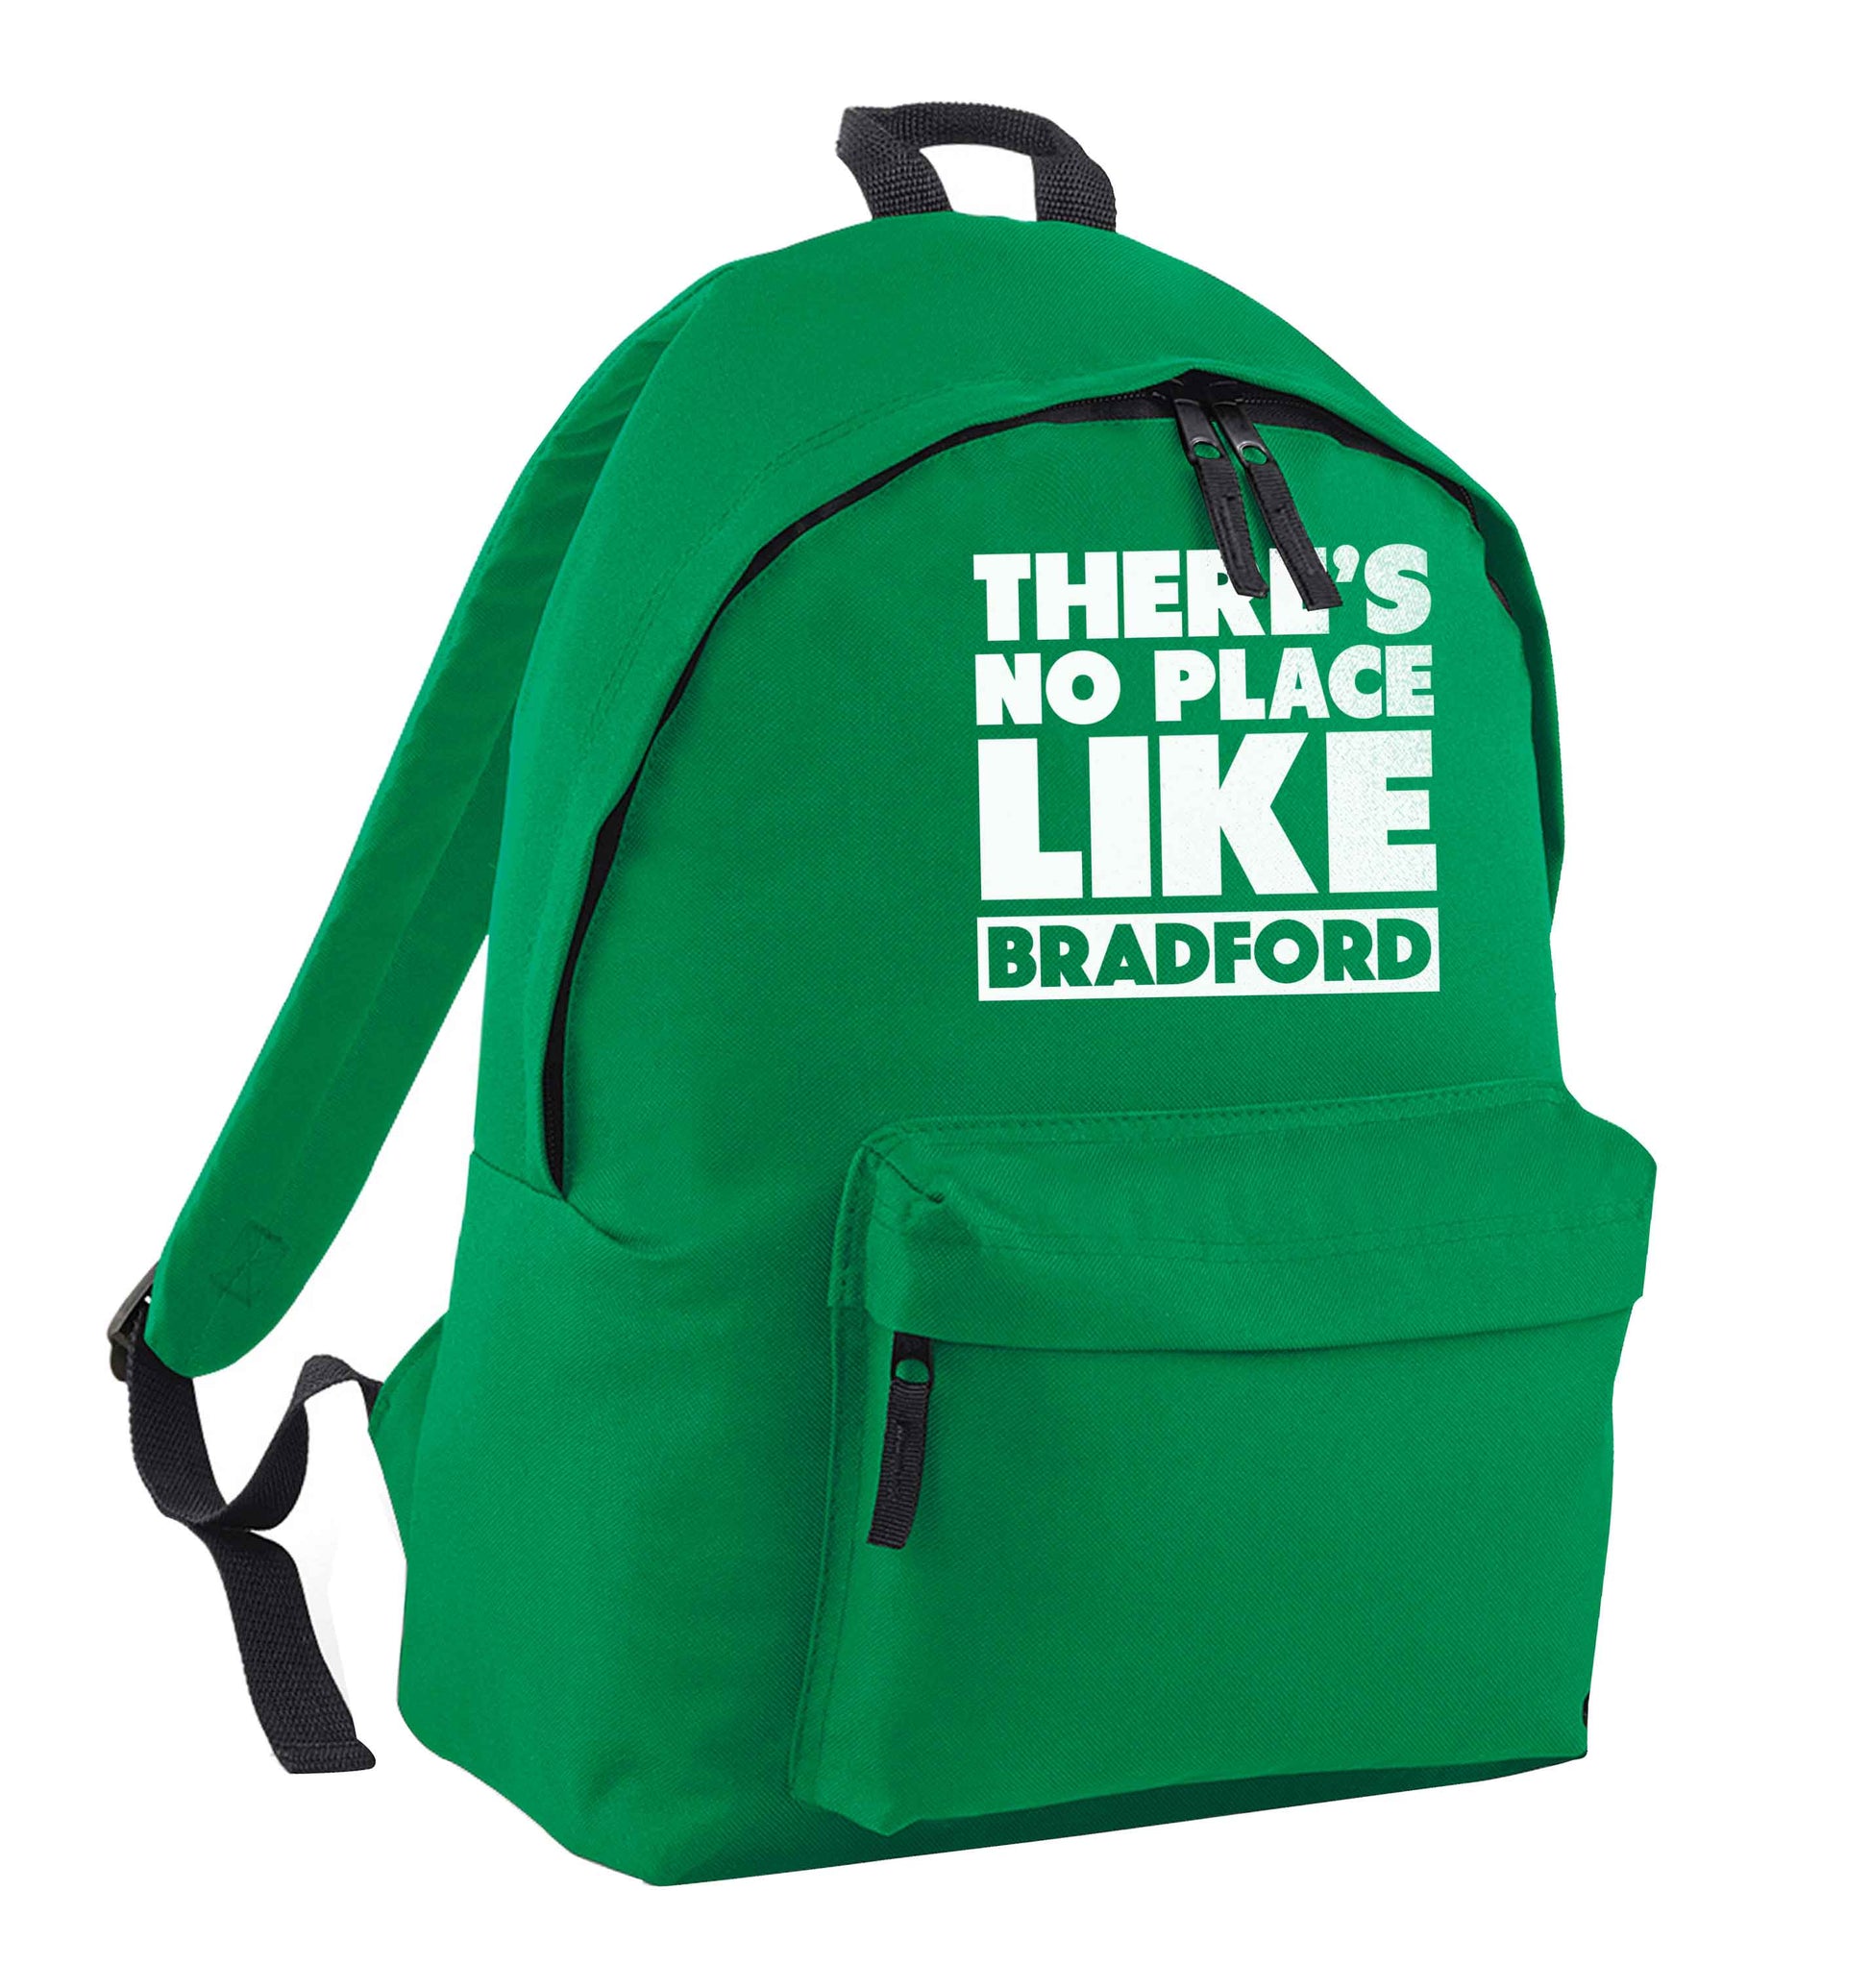 There's no place like Bradford green adults backpack